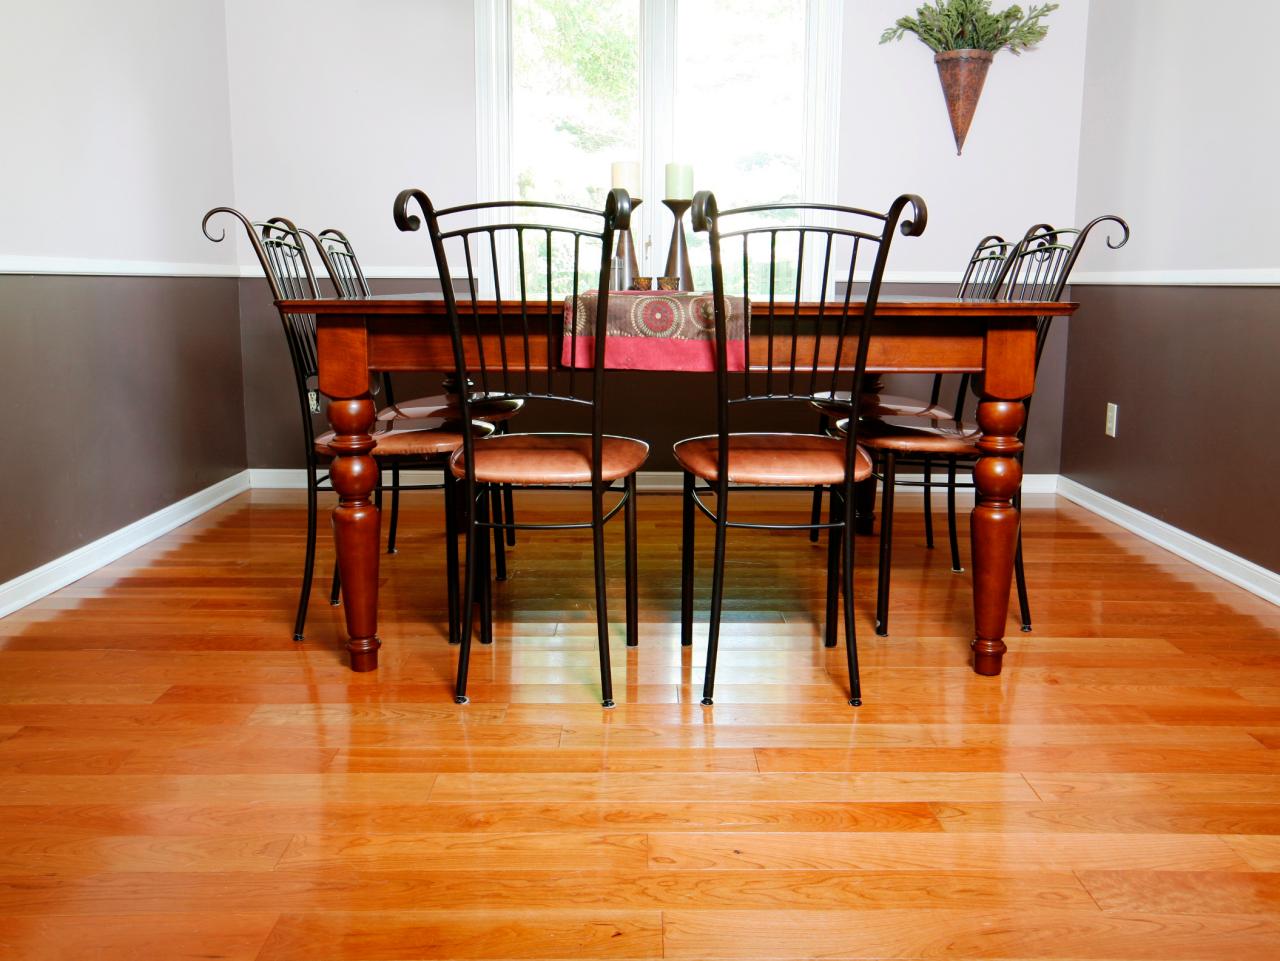 How To Install Prefinished Solid, Cost Per Square Foot To Install Prefinished Hardwood Floors